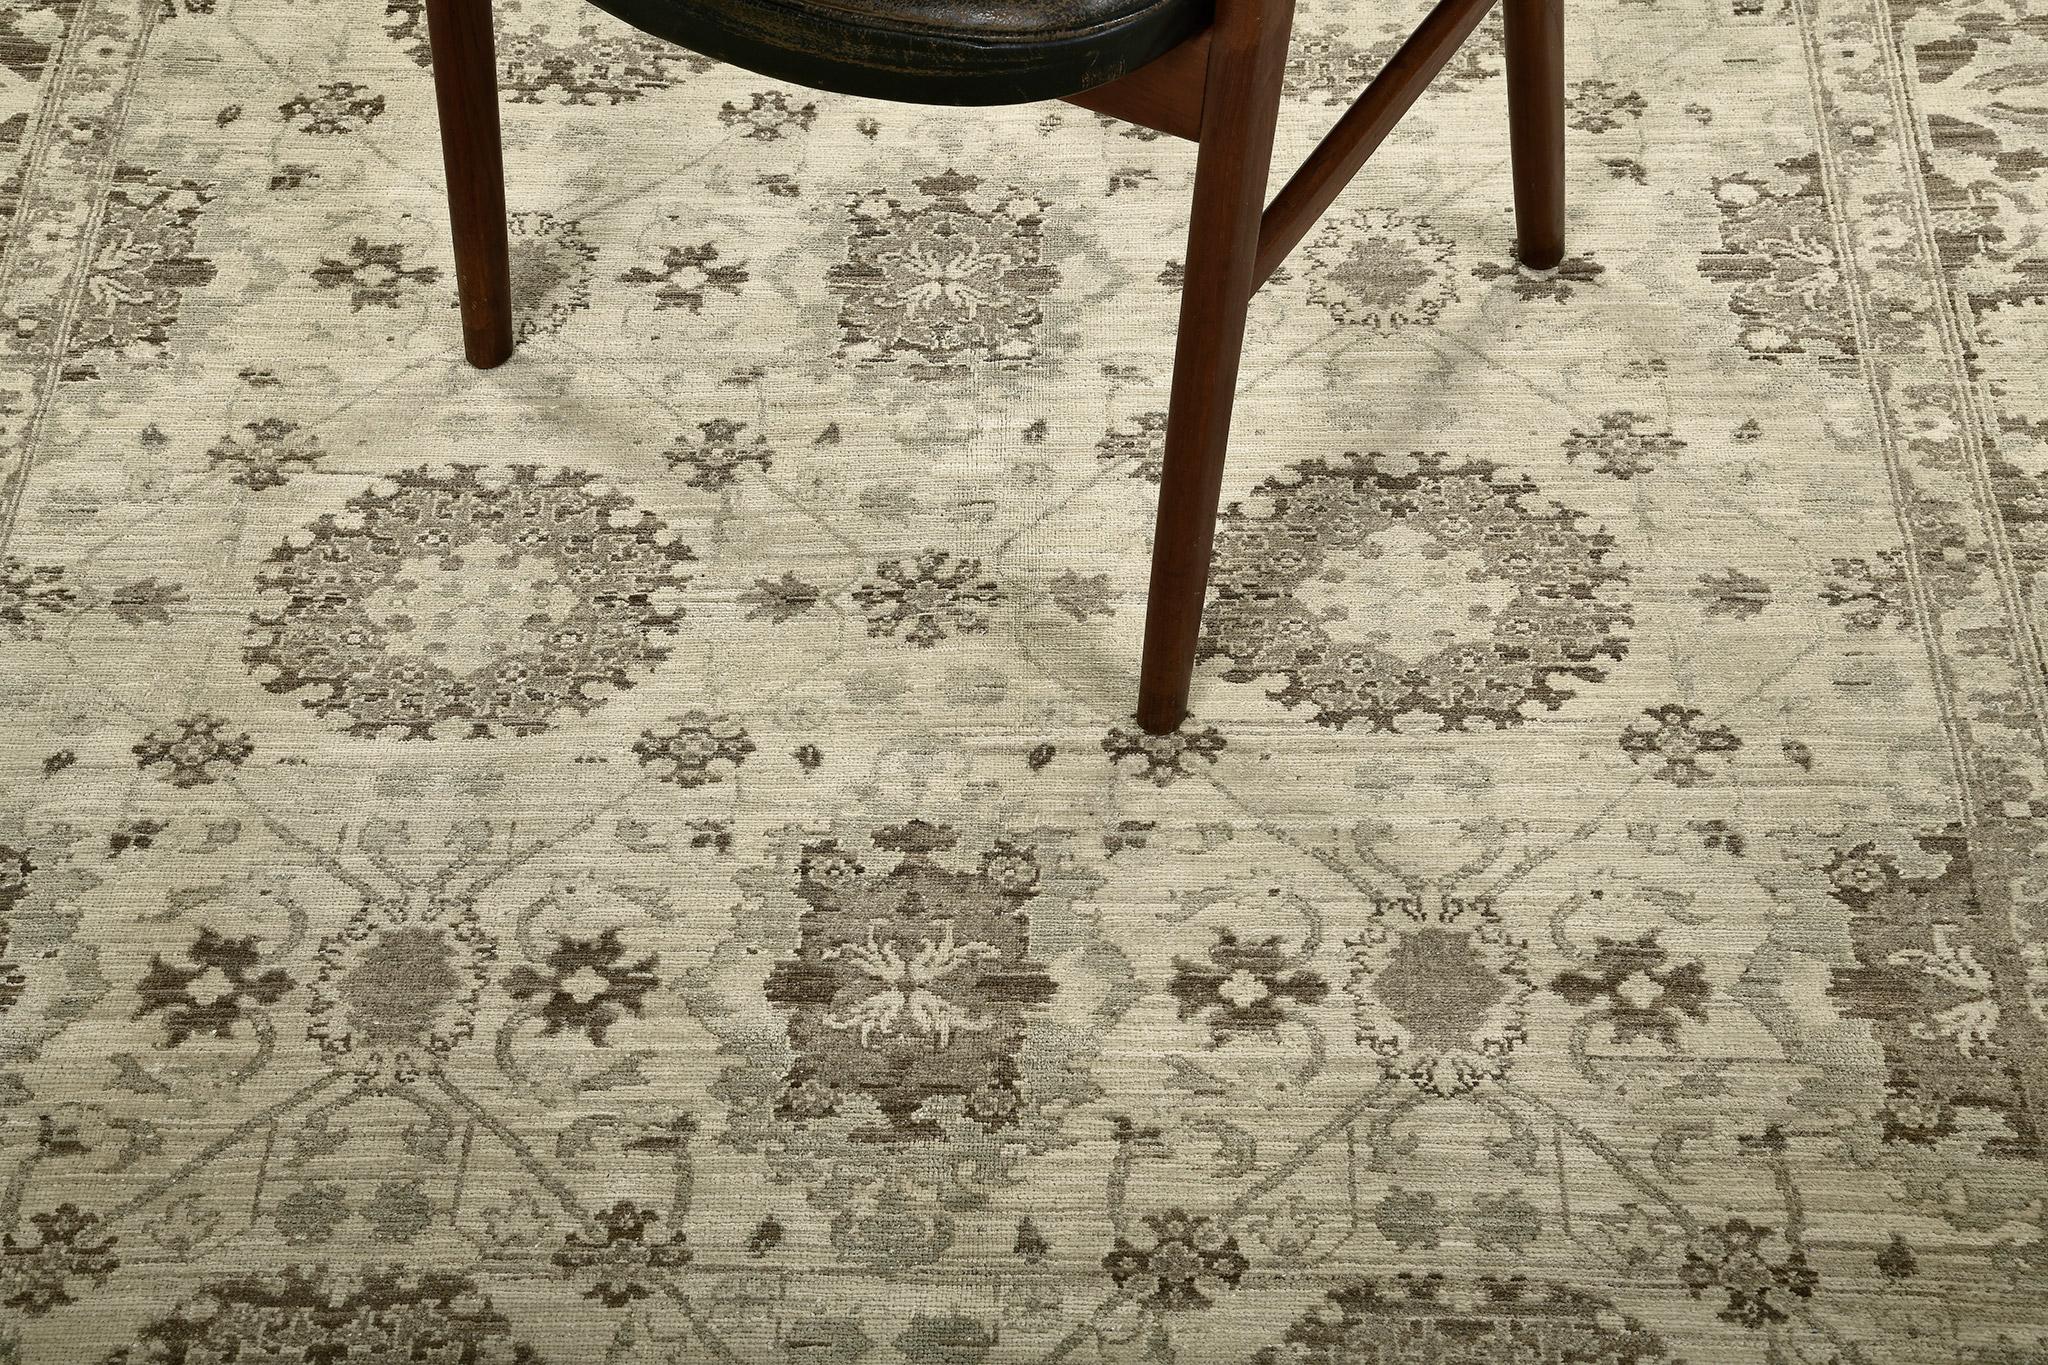 This majestic Mahal design revival rug has created an impressive pattern. Featuring the well-coordinated neutral tone in mocha and the muted palette consisting of sand and tan, this elegant rug is composed of enchanting florid elements forming